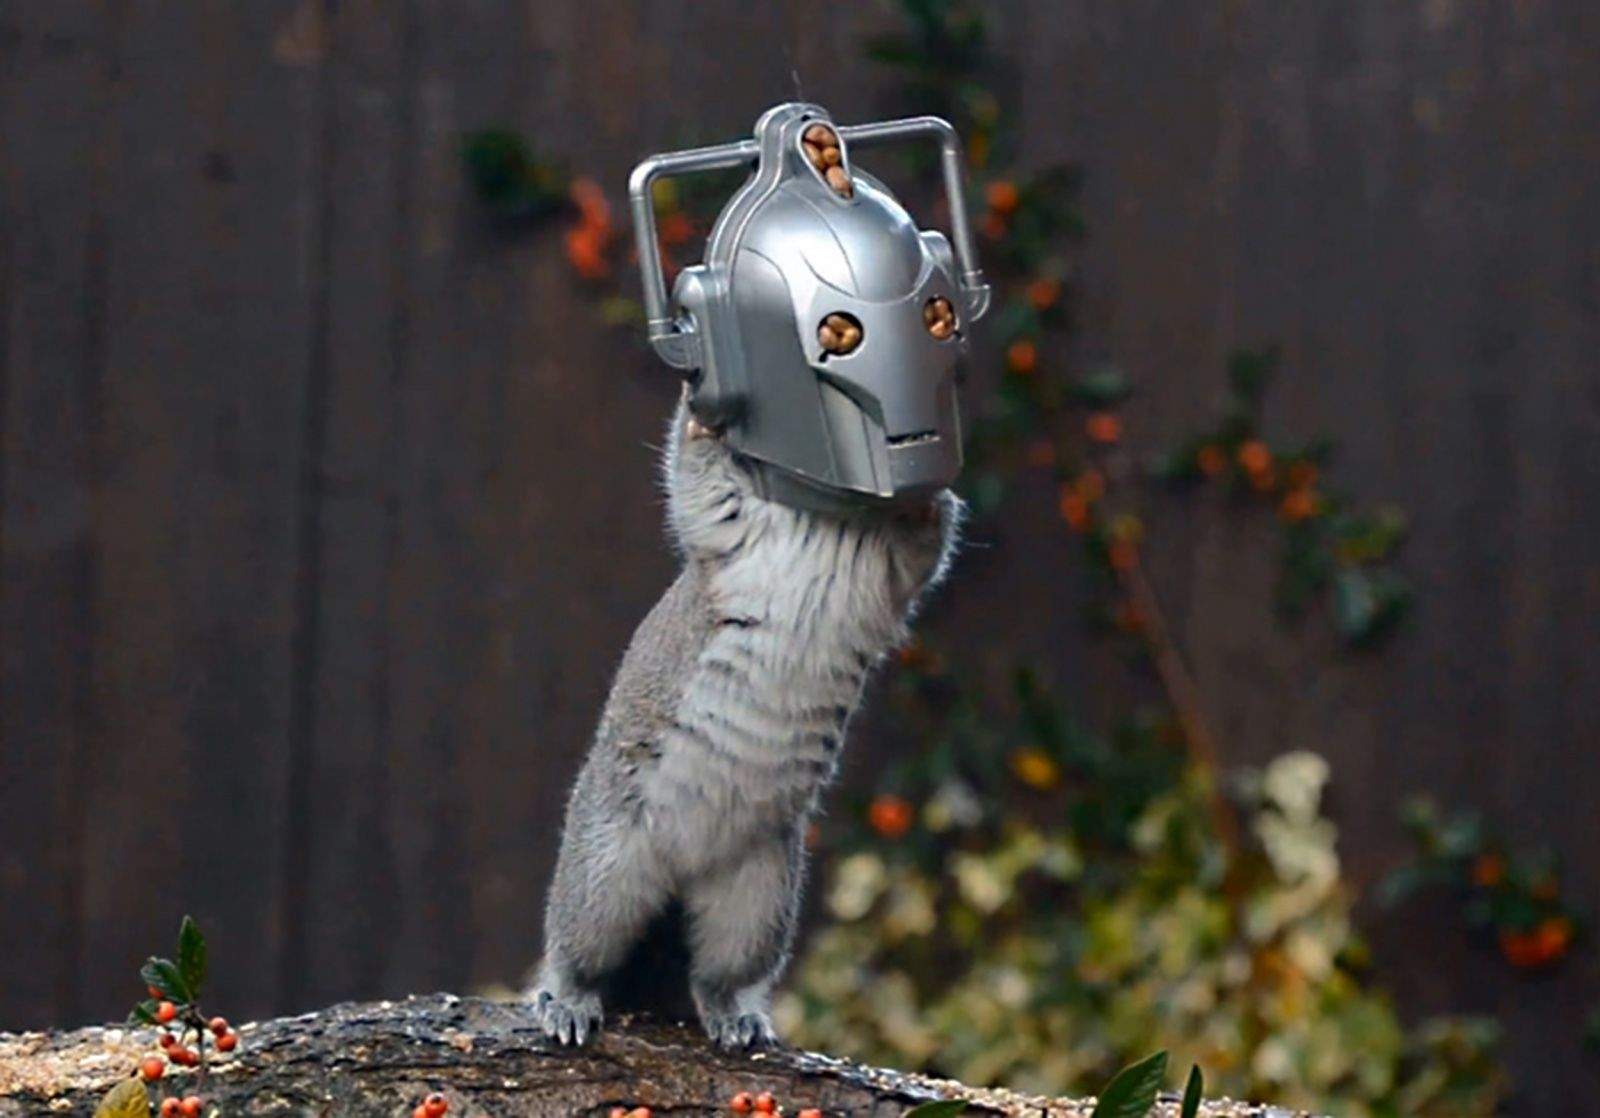 A squirrel unknowingly looks like a Cyberman from the hit TV show Doctor Who. Photo by Chris Balcombe